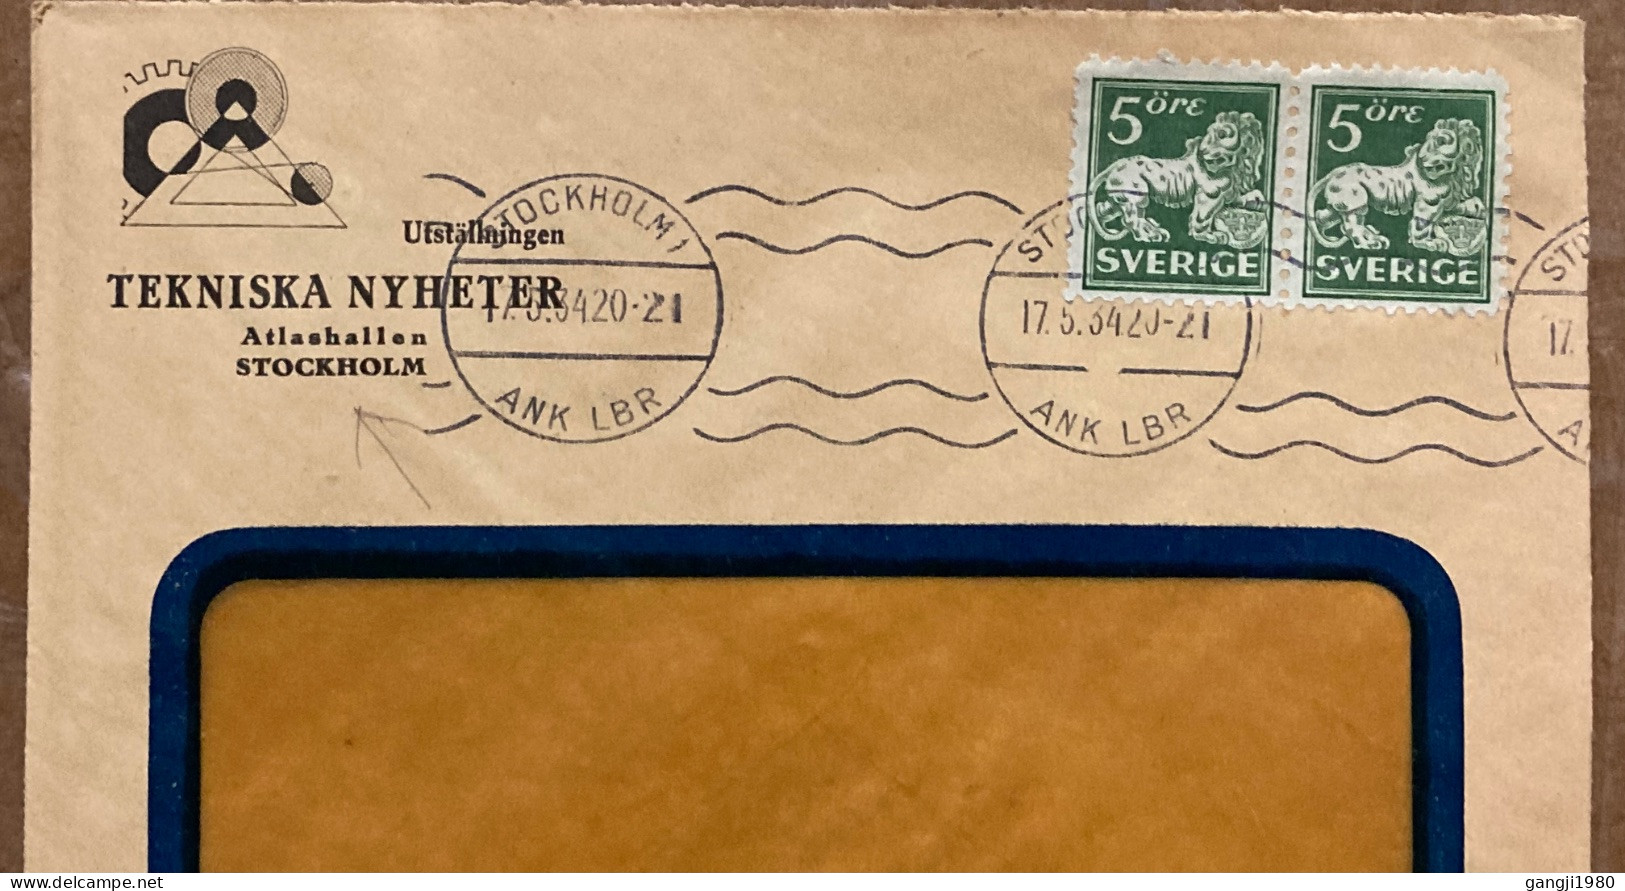 SWEDEN 1934, ADVERTISING COVER USED, TECHNICAL NEWS & EXHIBITION, STOCKHOLM CITY CANCEL, LION  2 STAMP. - Covers & Documents